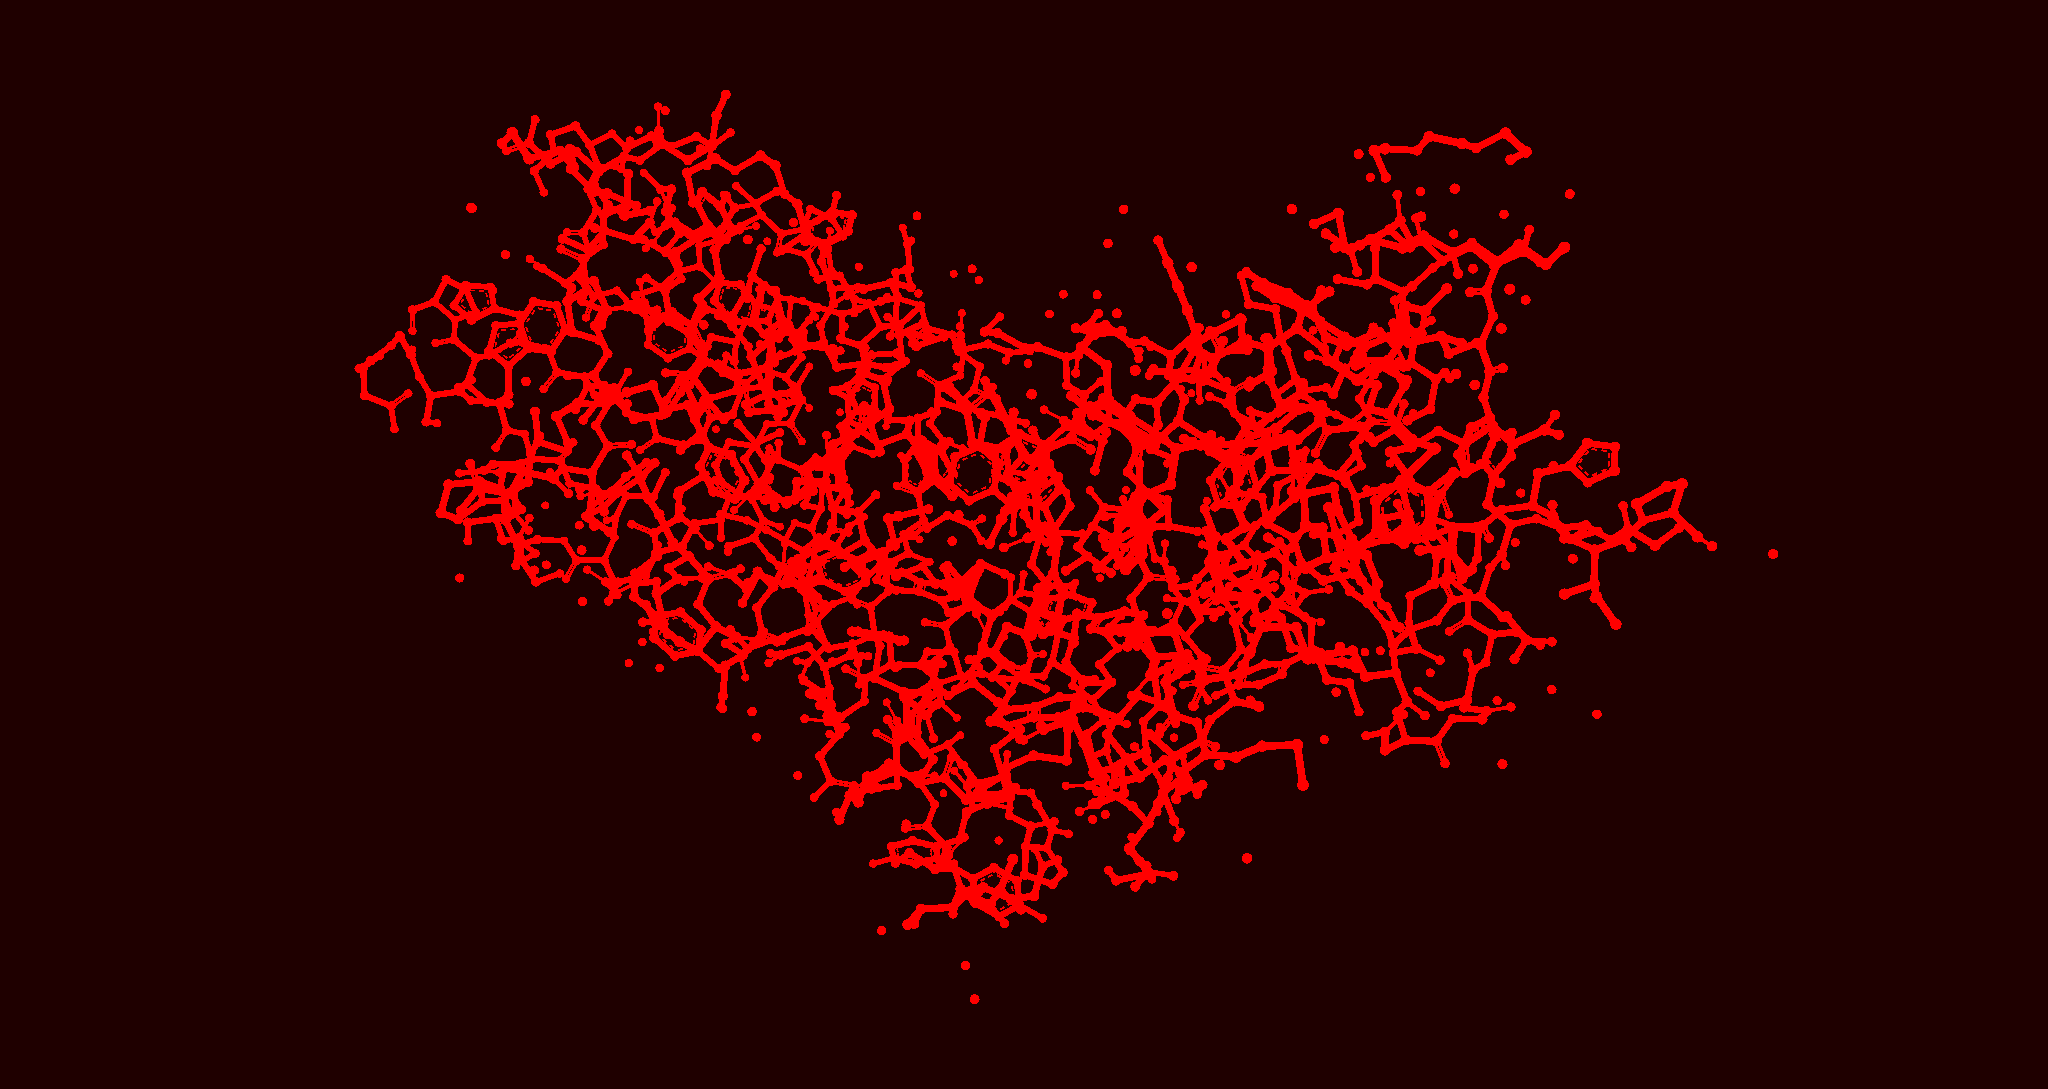 A rendering of a large protein molecule where pixels containing a fragment of the rendered mesh are colored bright red.